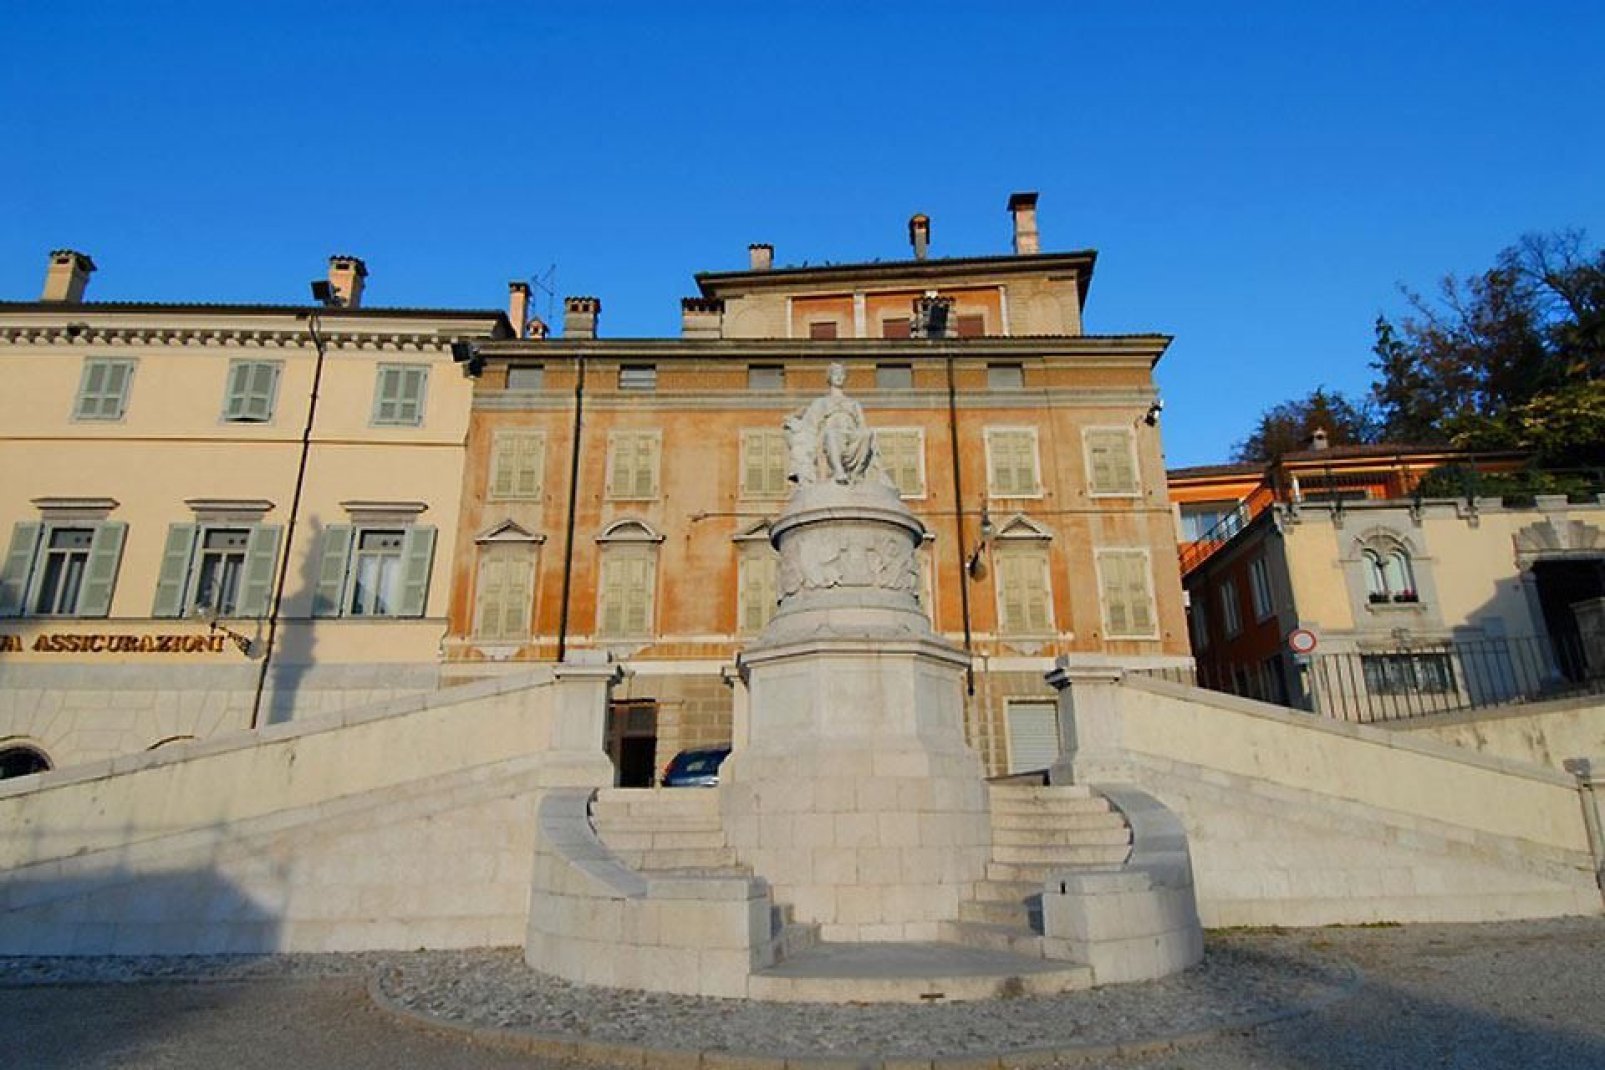 Created to celebrate the stipulation of the Treaty of Campo Formio, the monument was placed on the Piazza Libertà in 1819.